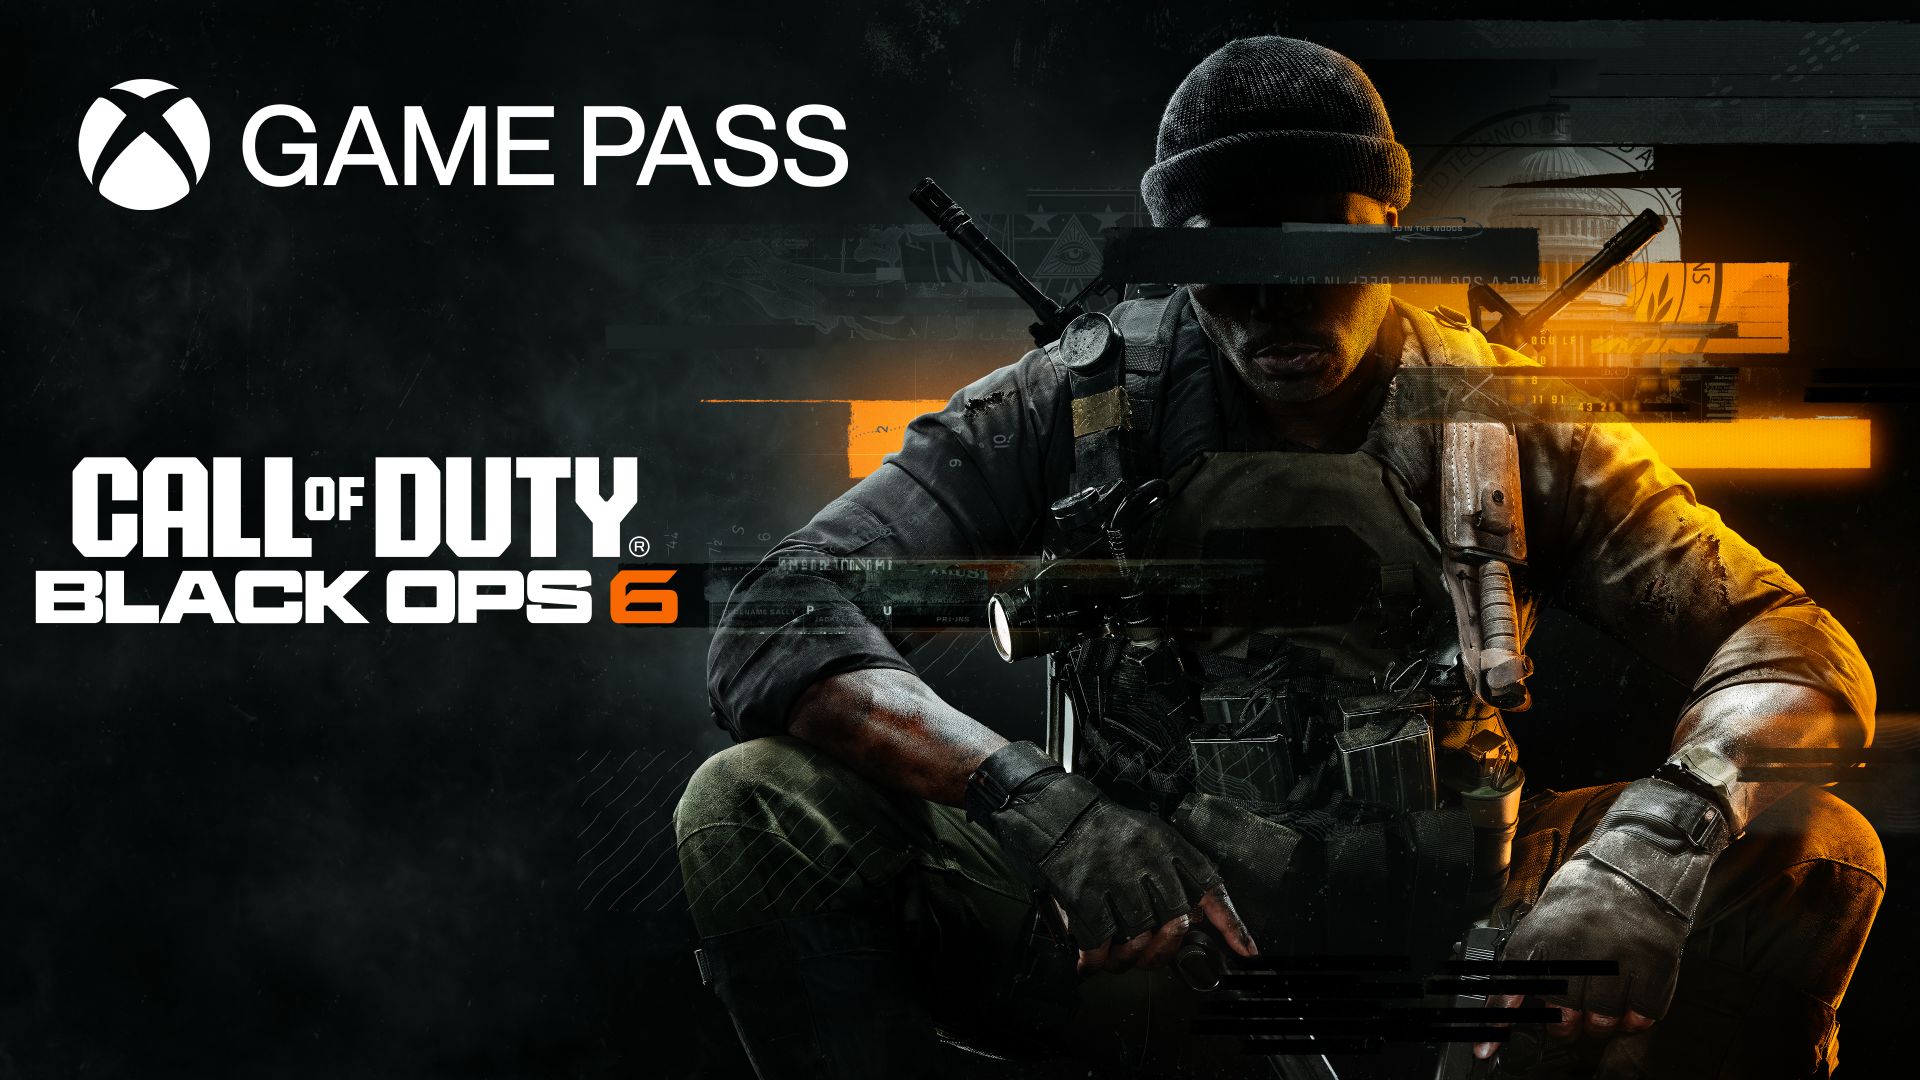 Play Call of Duty: Black Ops 6 on Day One with Xbox Game Pass